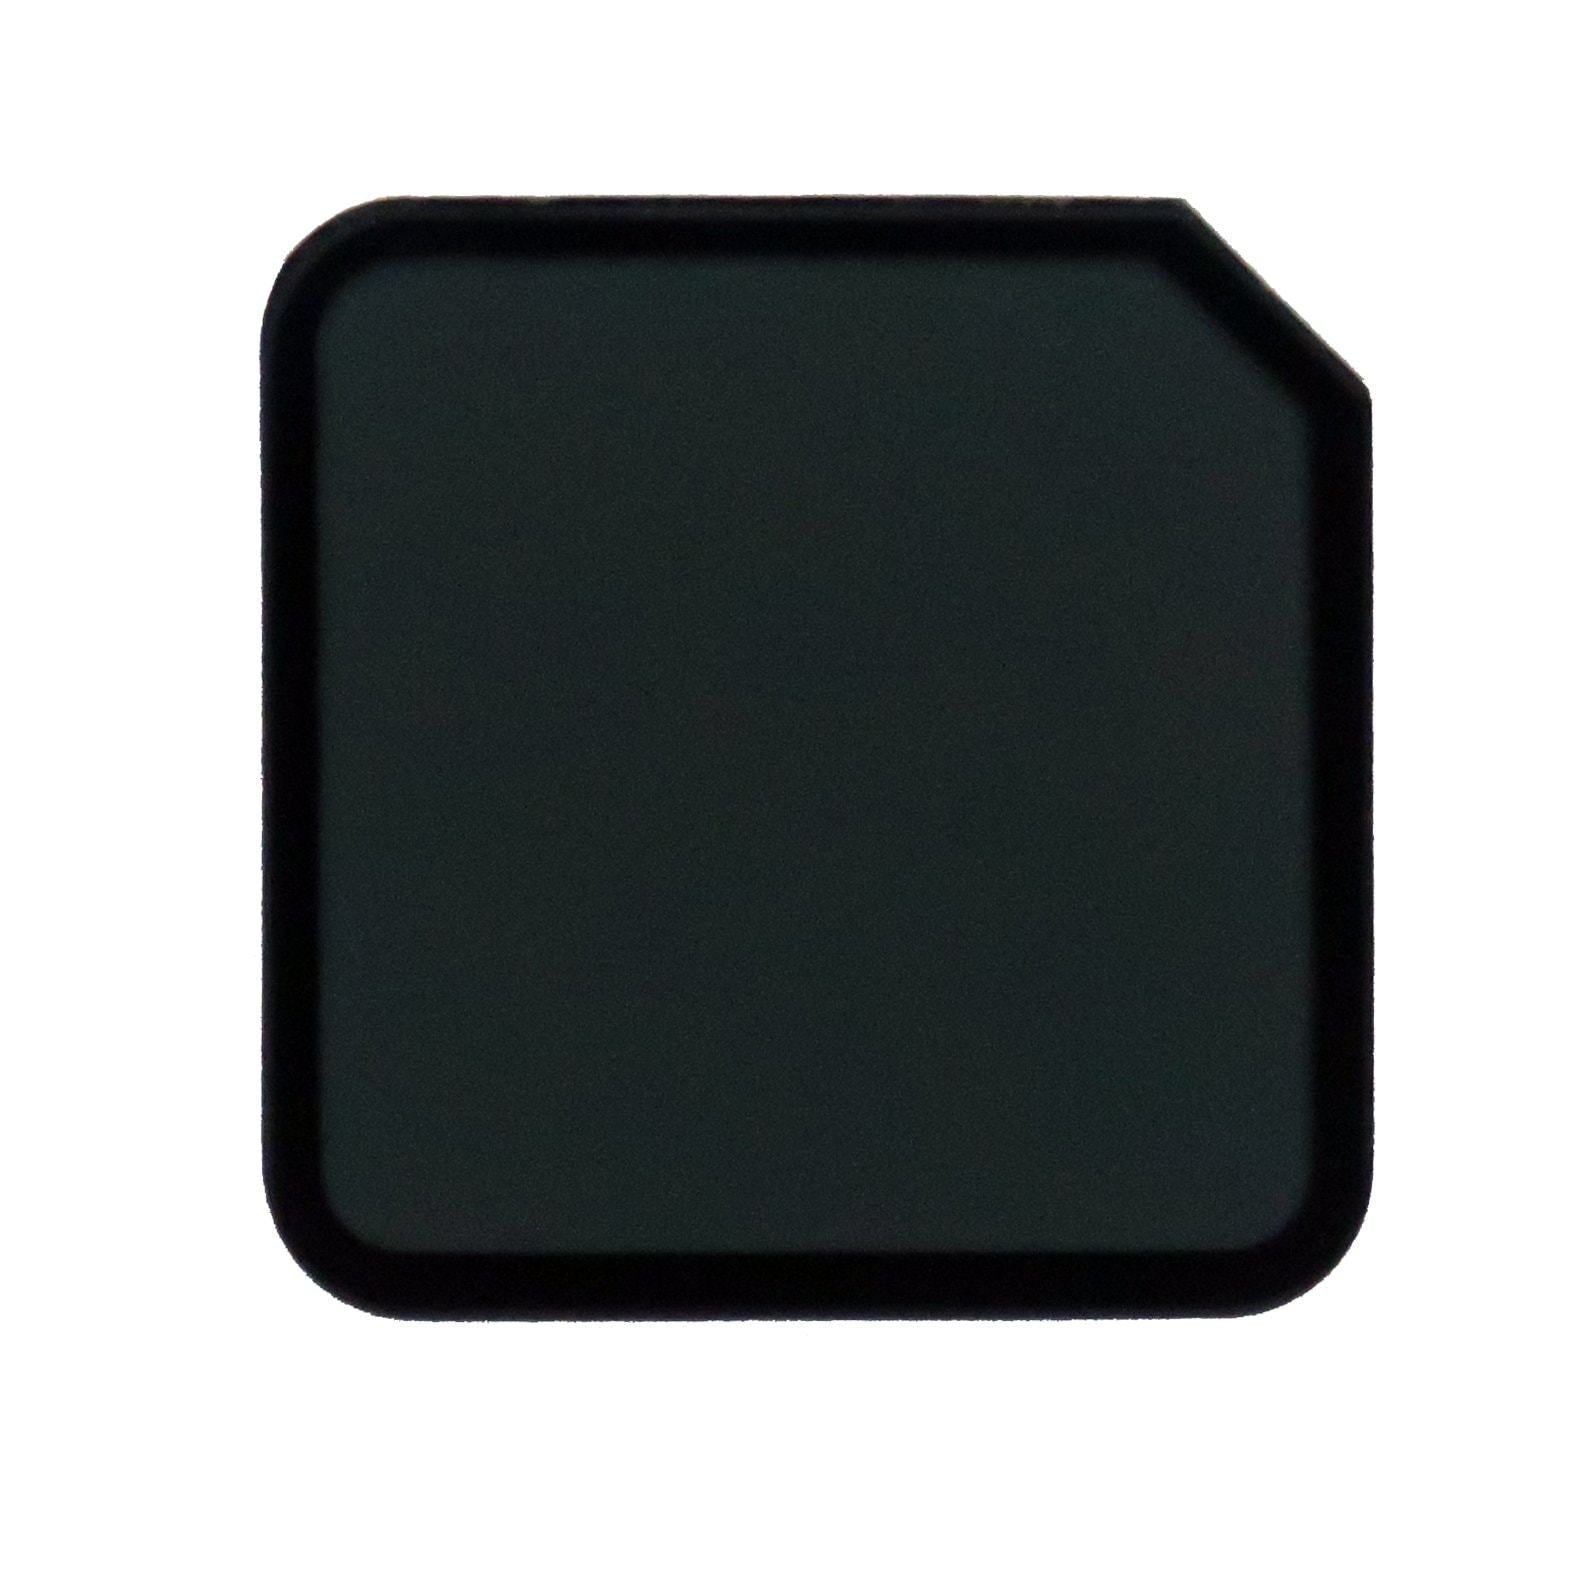 Camera Butter Glass ND filter for GoPro Session 4/5 4 - Camera Butter - Drone Authority